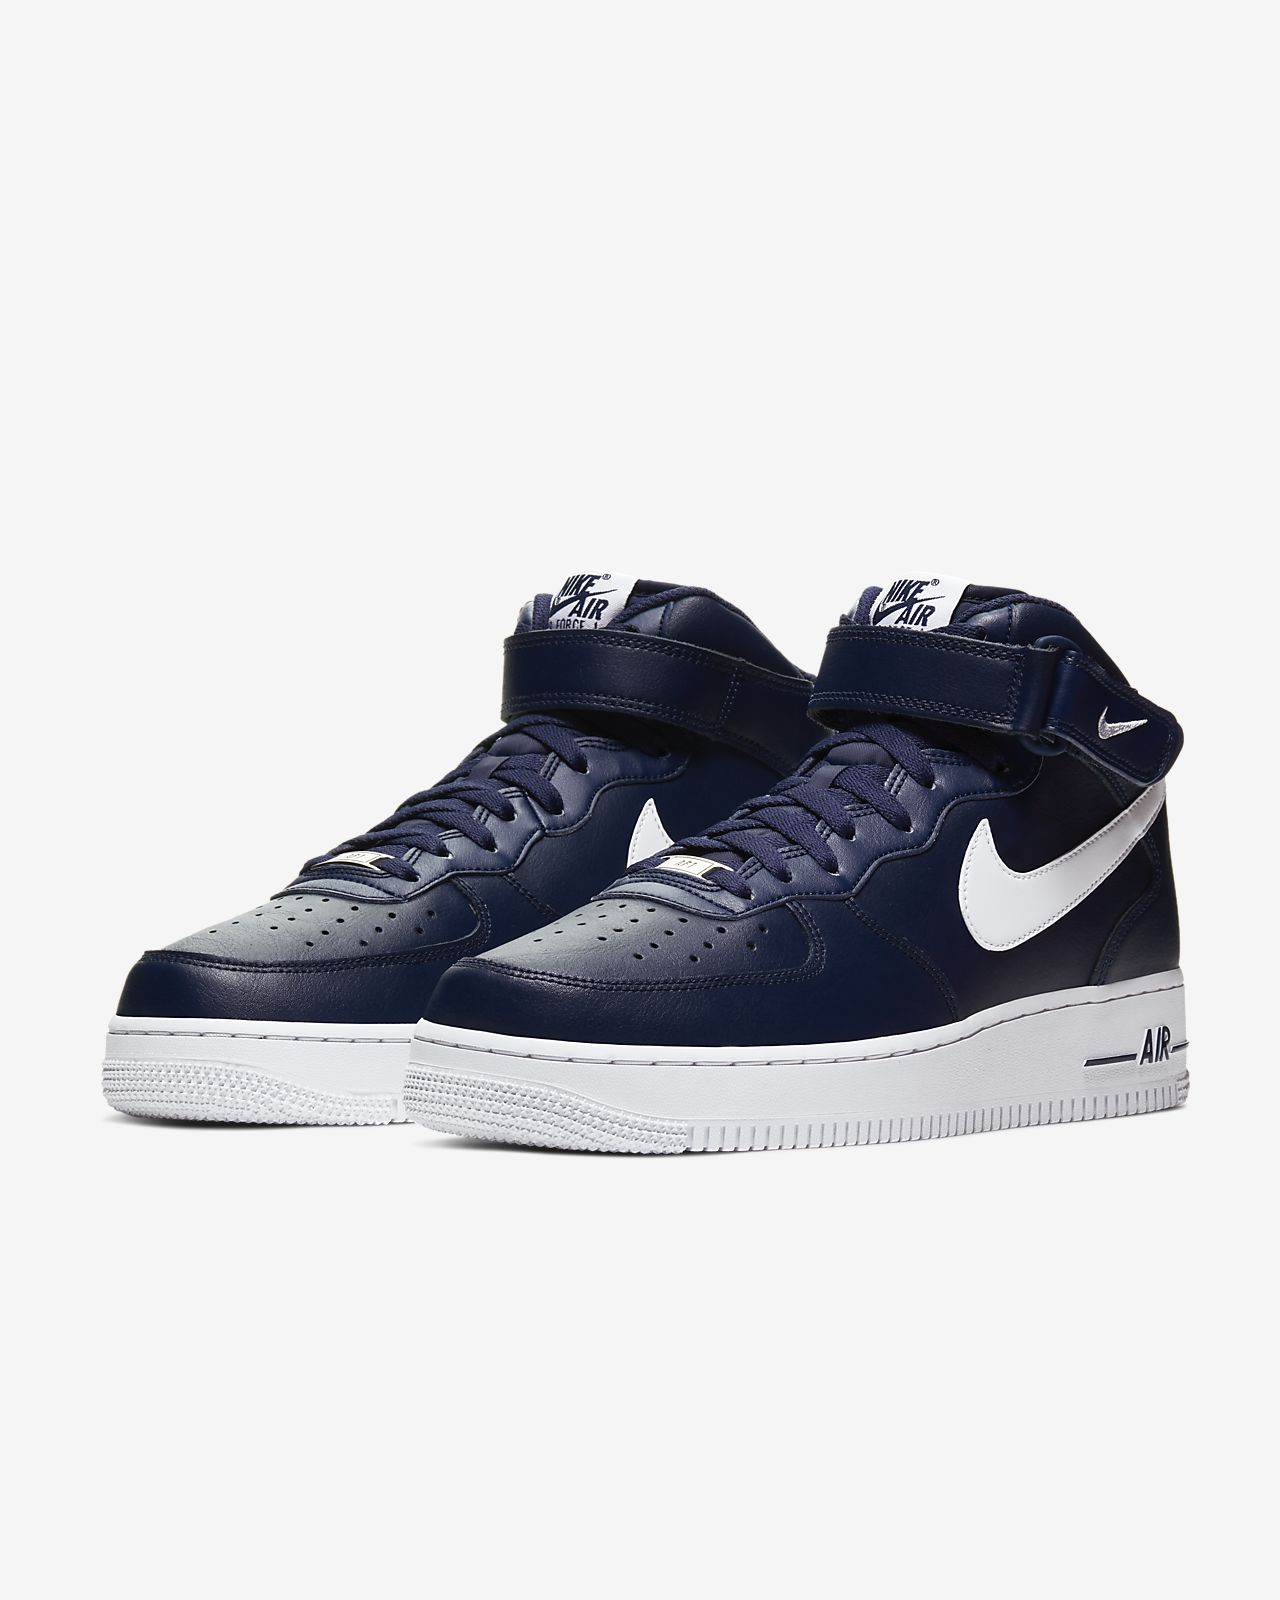 Purchase \u003e nike air force 1 azul oscuro, Up to 66% OFF